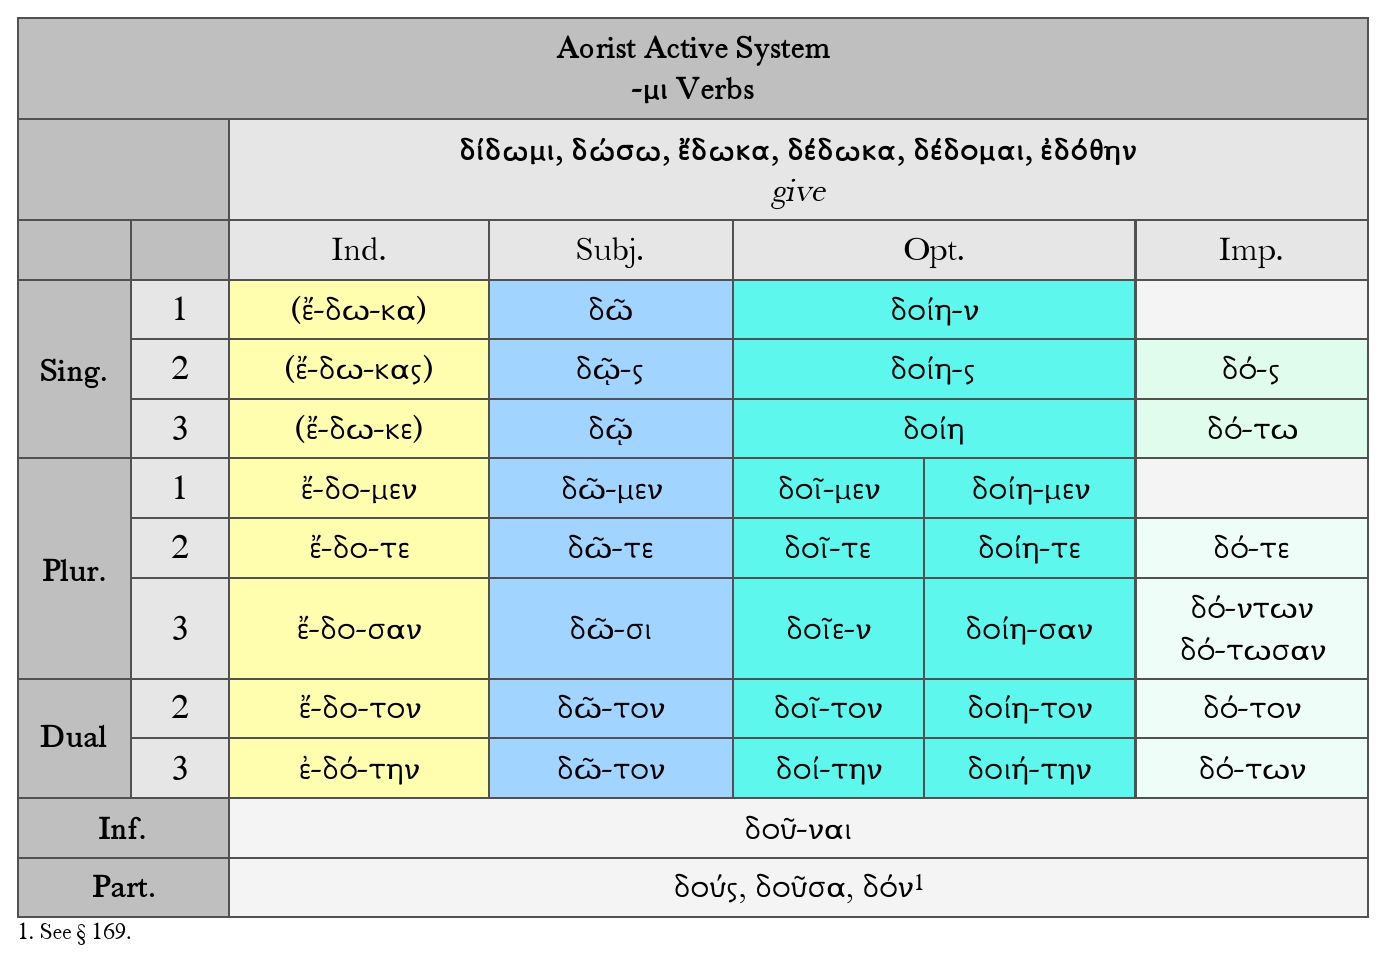 Goodell: Greek -μι Verbs Aorist Active System Chart for δίδωμι